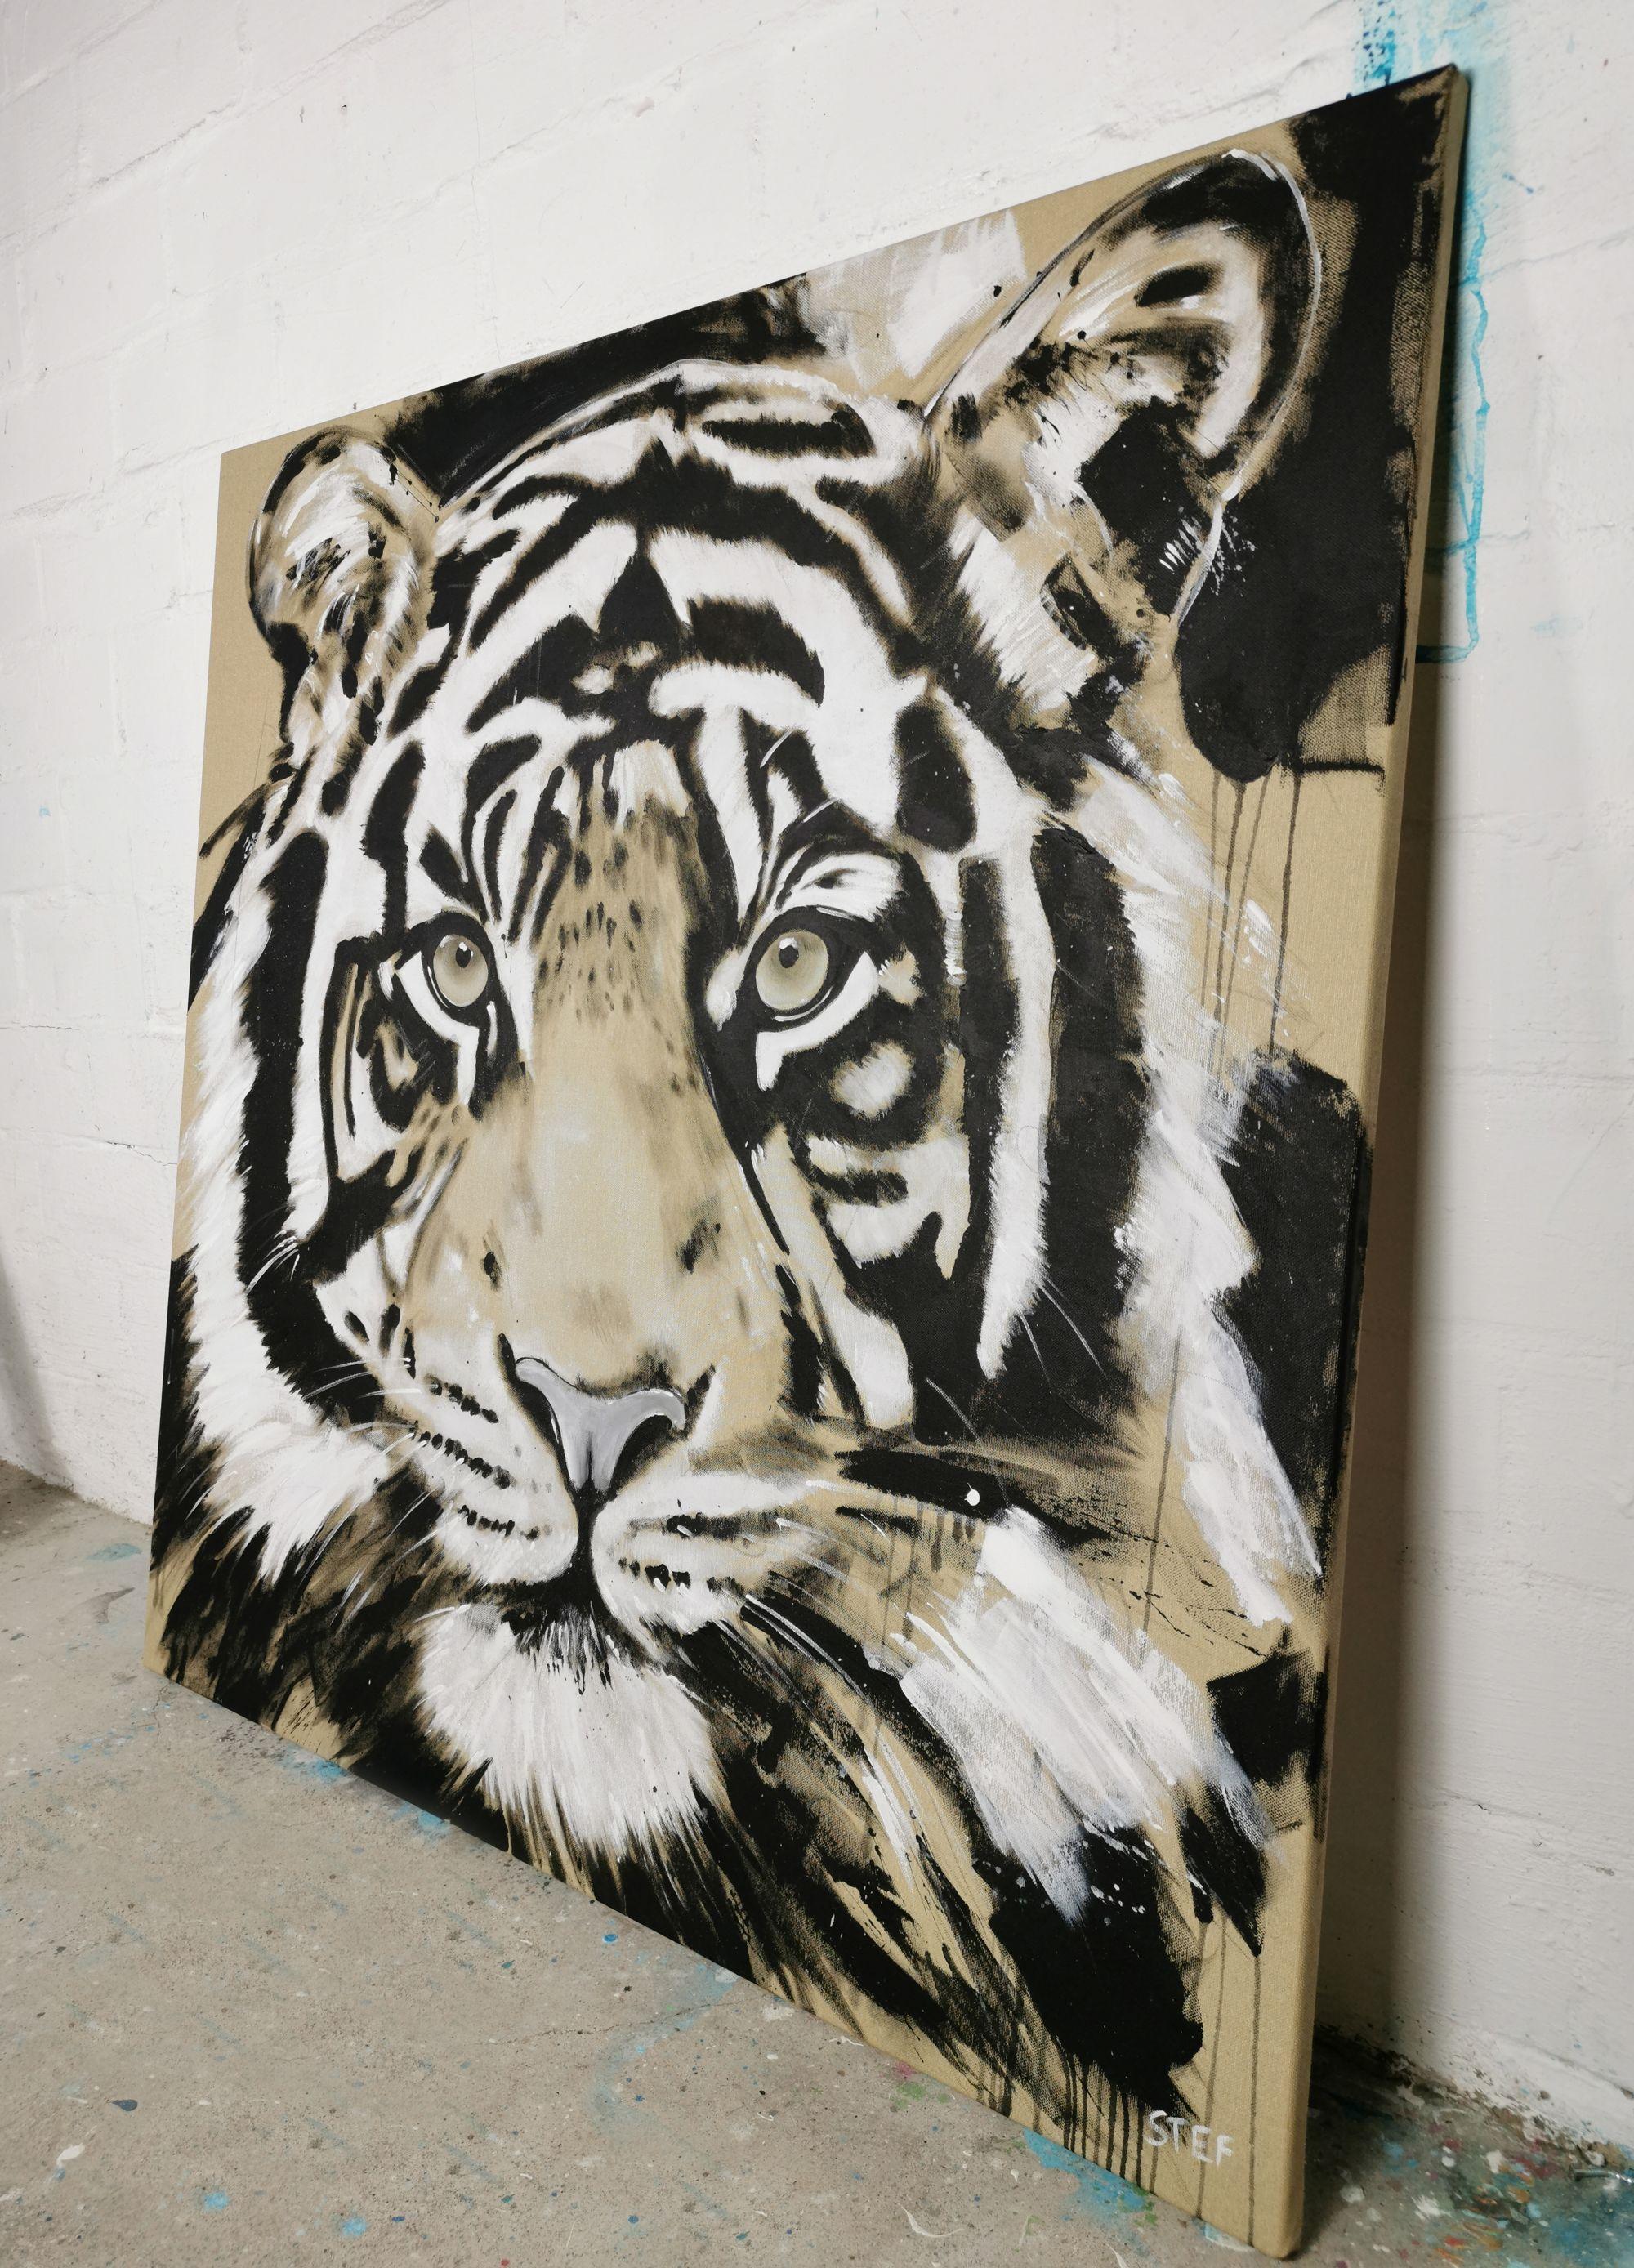 TIGER #5 - Big Cat, Painting, Acrylic on Canvas For Sale 3